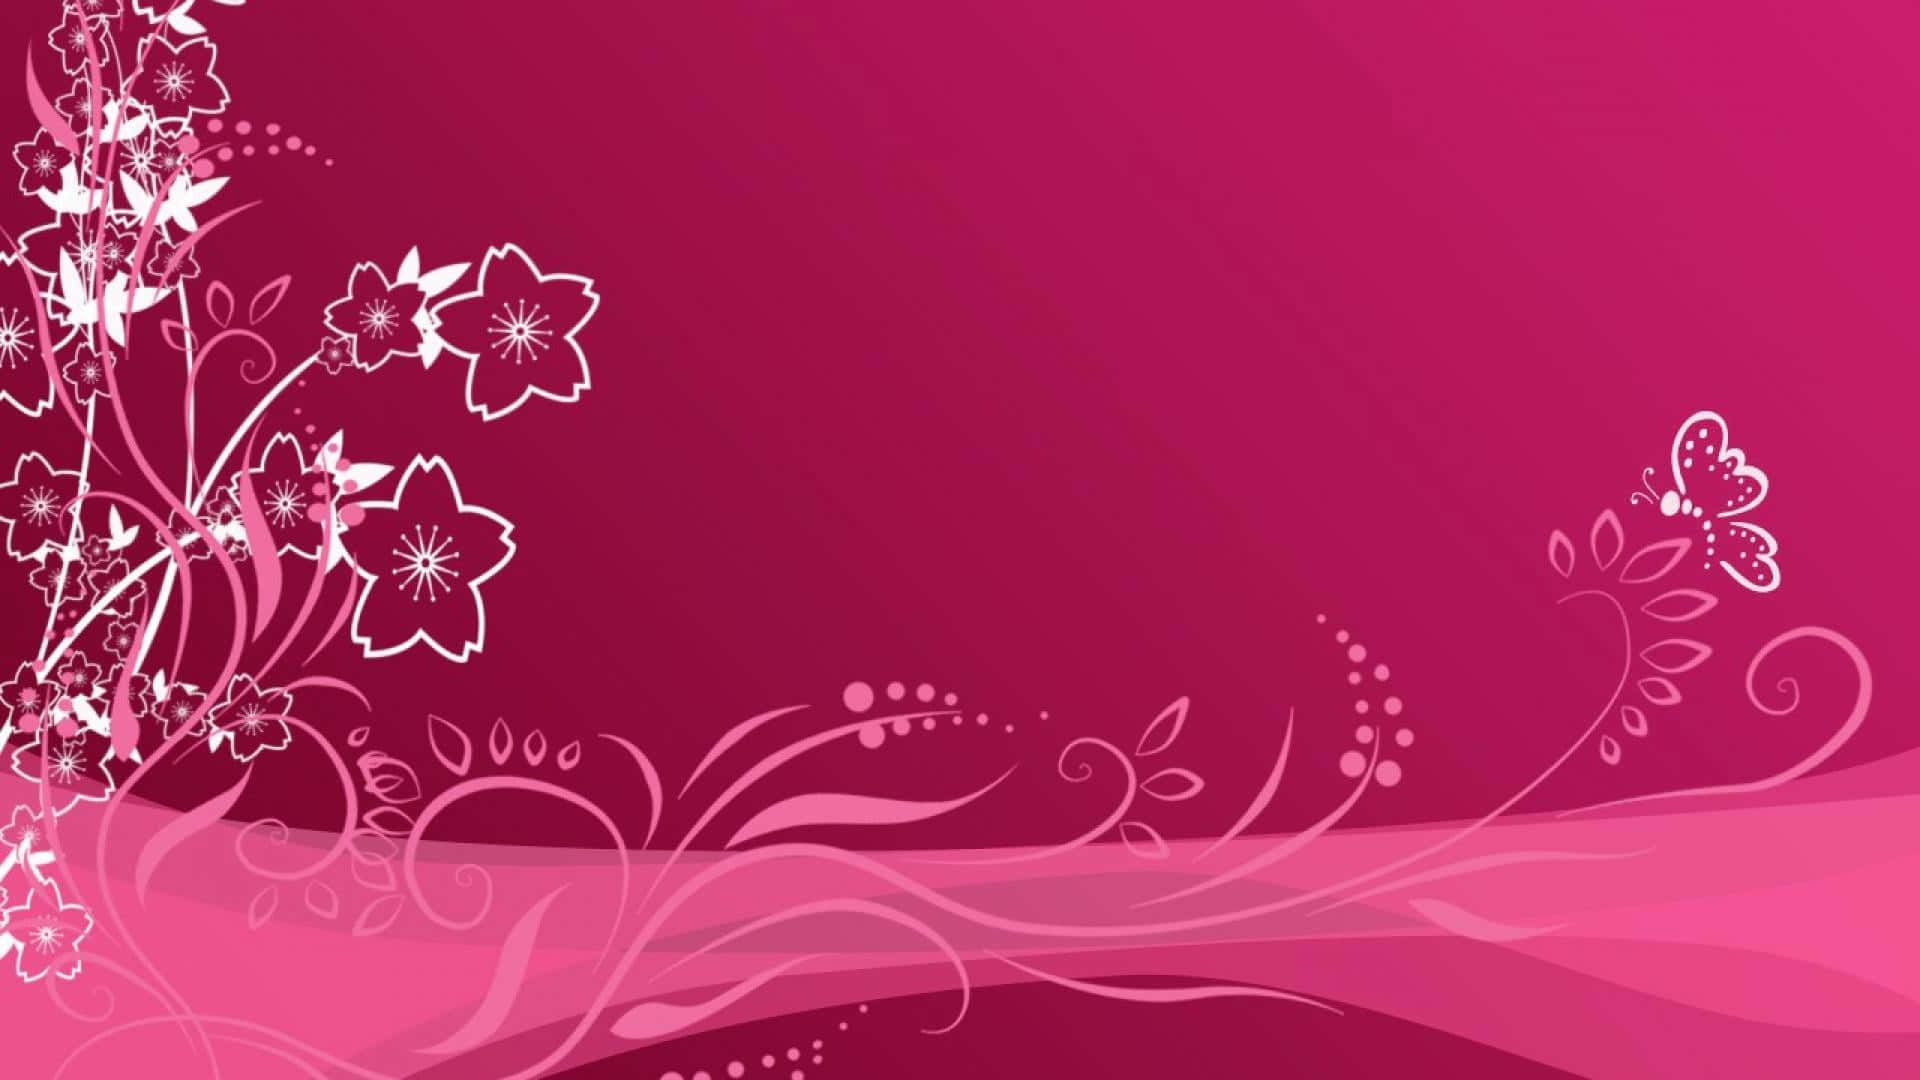 Caption: Dreamy Pink Girly Abstract Background